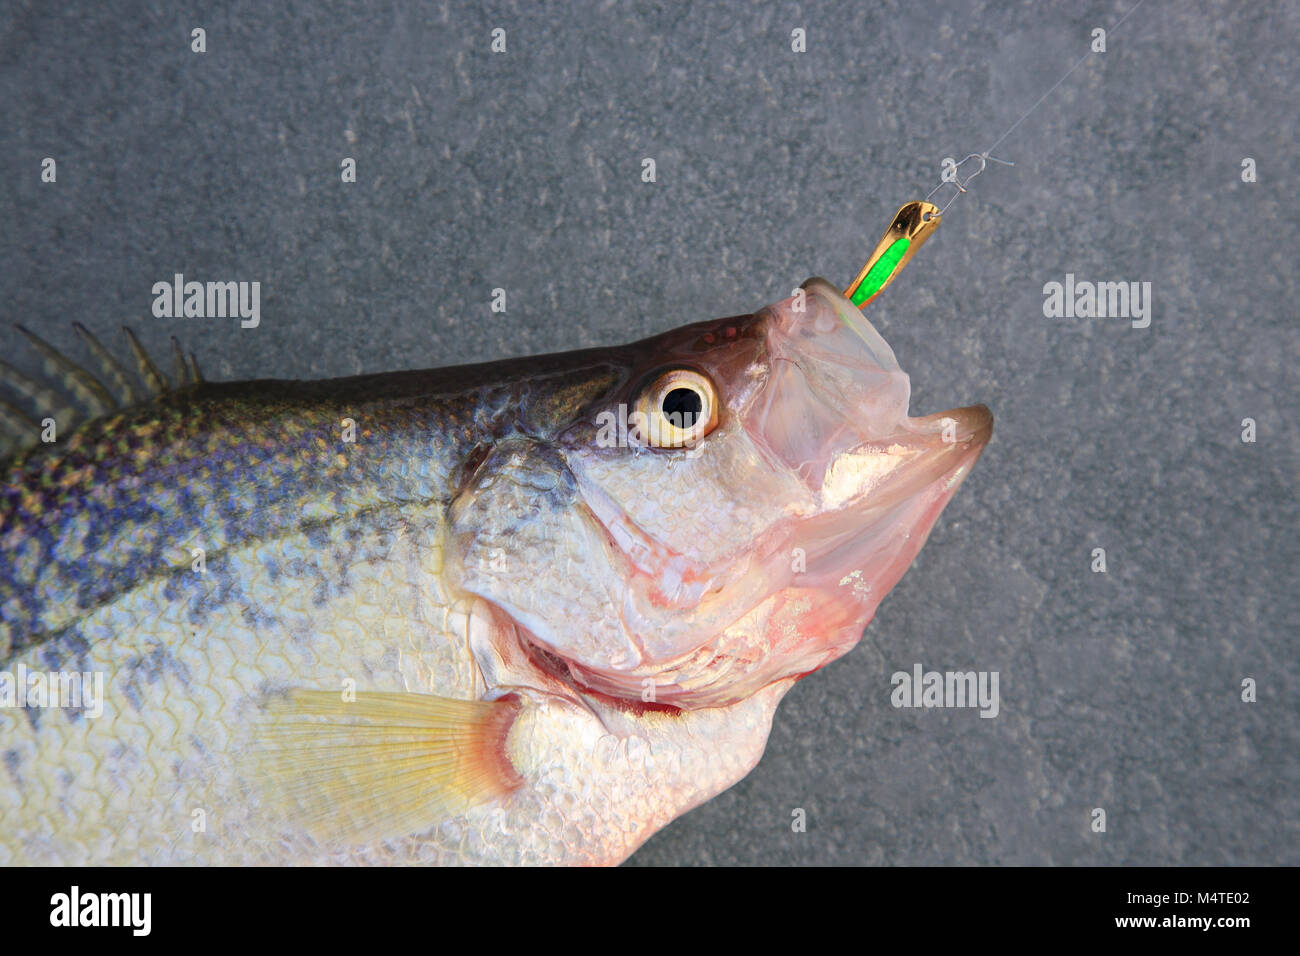 crappie pan fish with lure in mouth lying on ice Stock Photo - Alamy